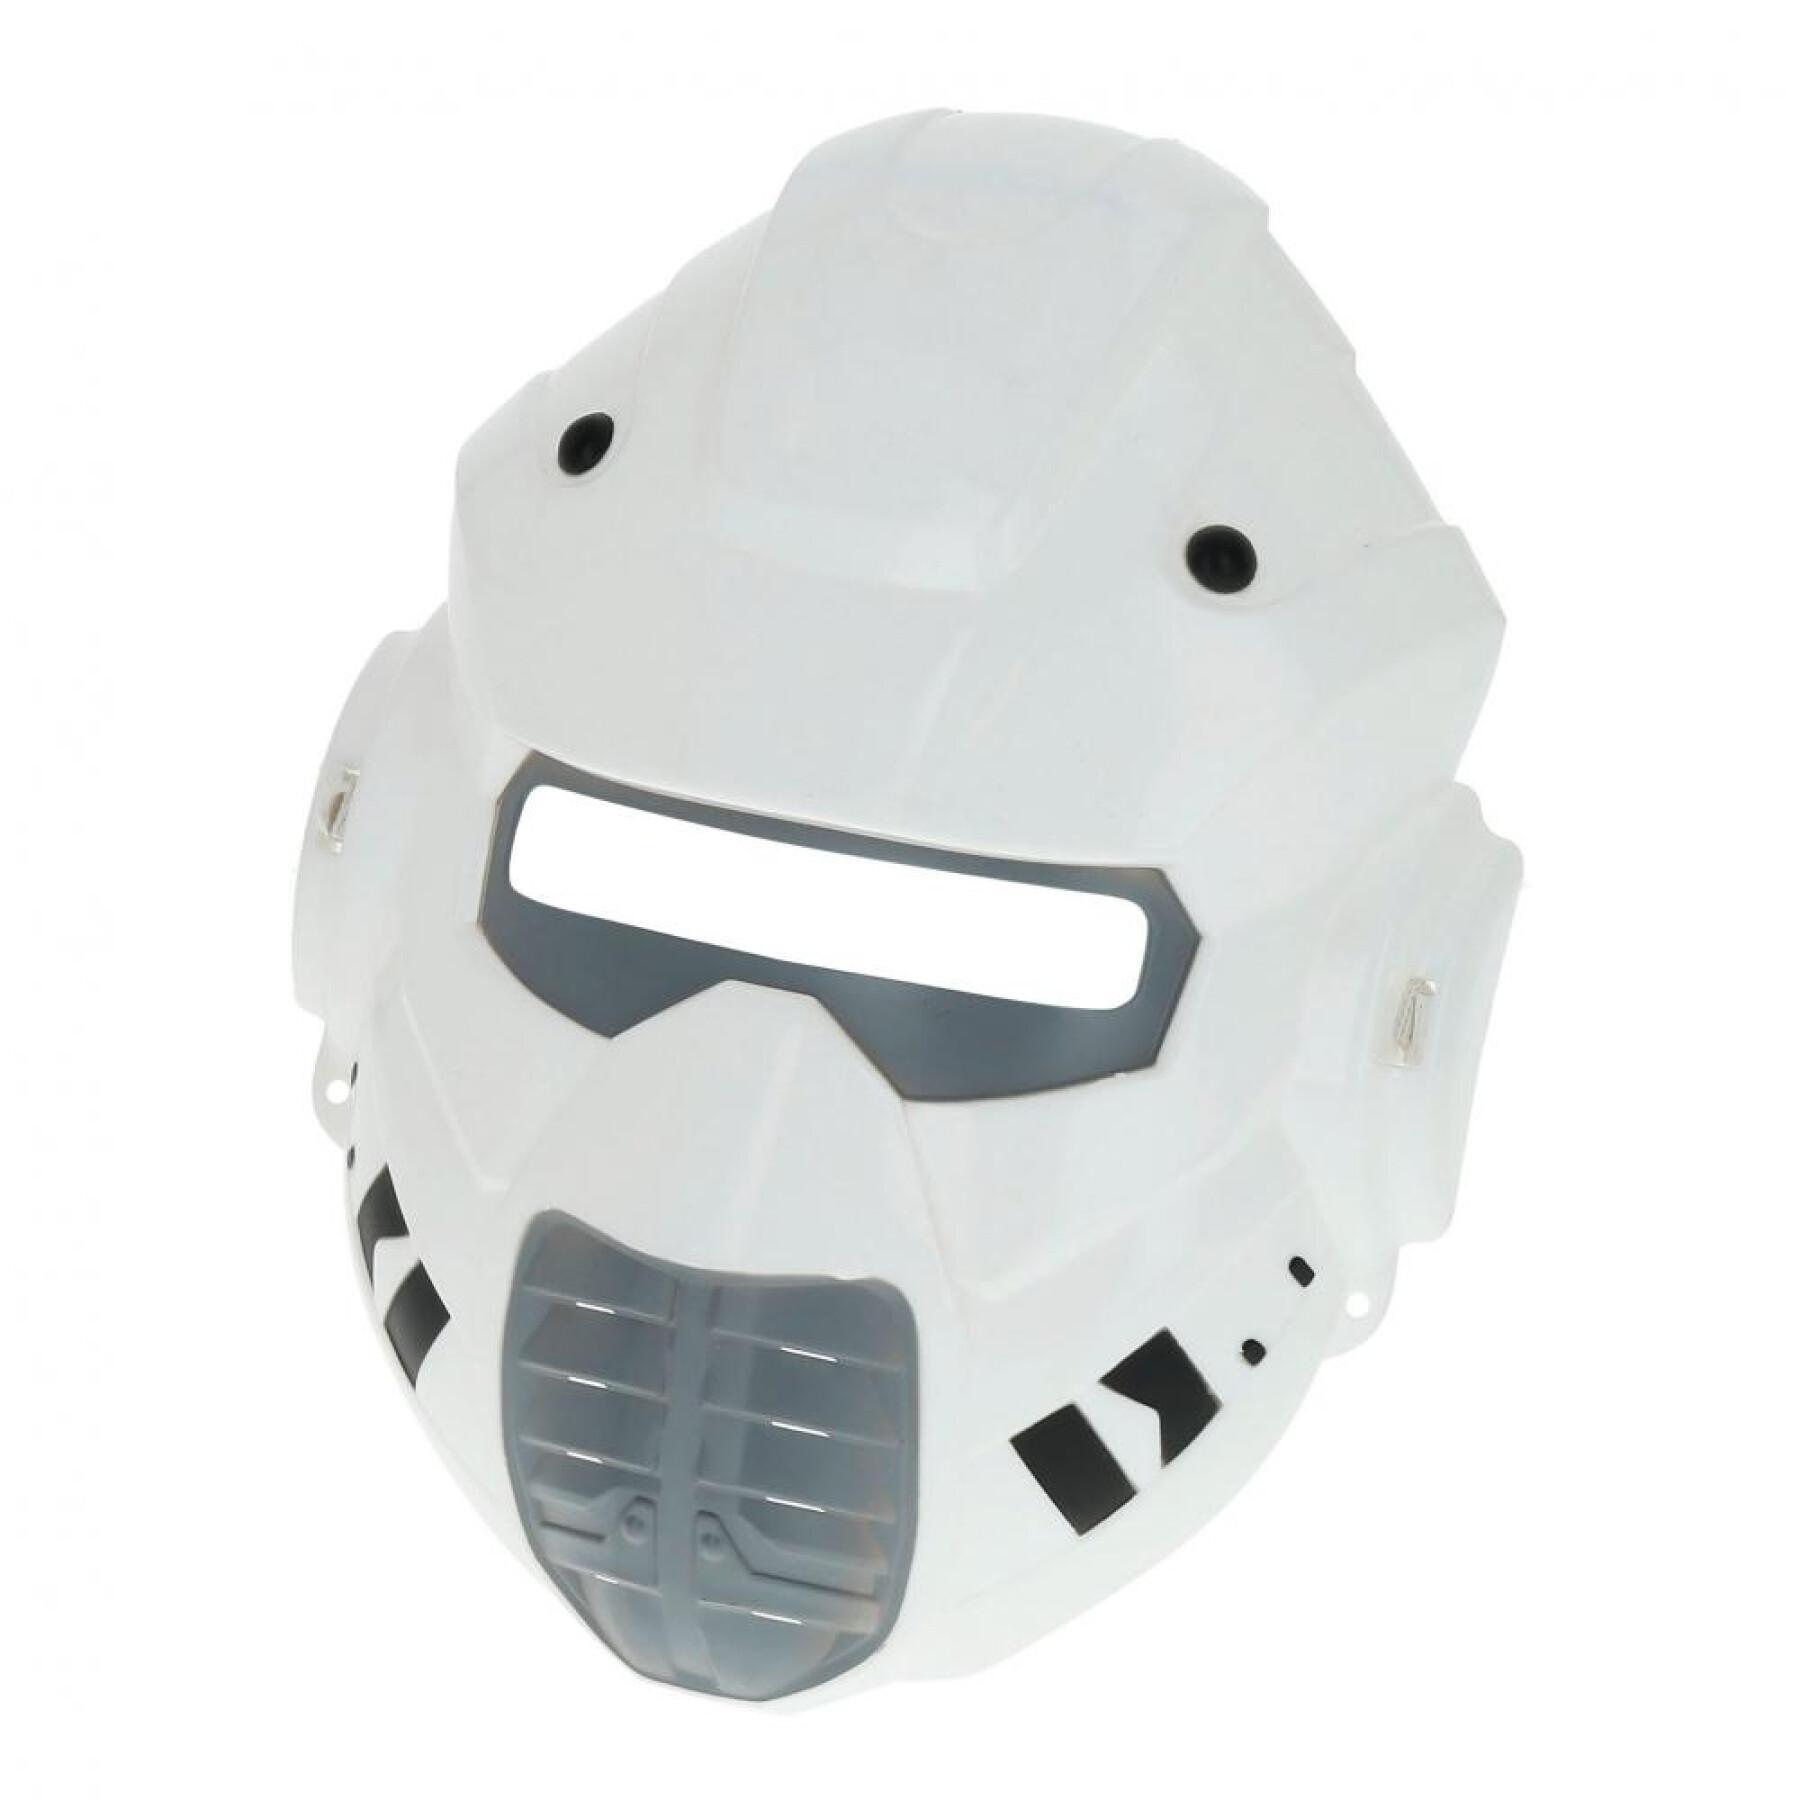 Disguise mask guardian of space CB Toys 22 cm